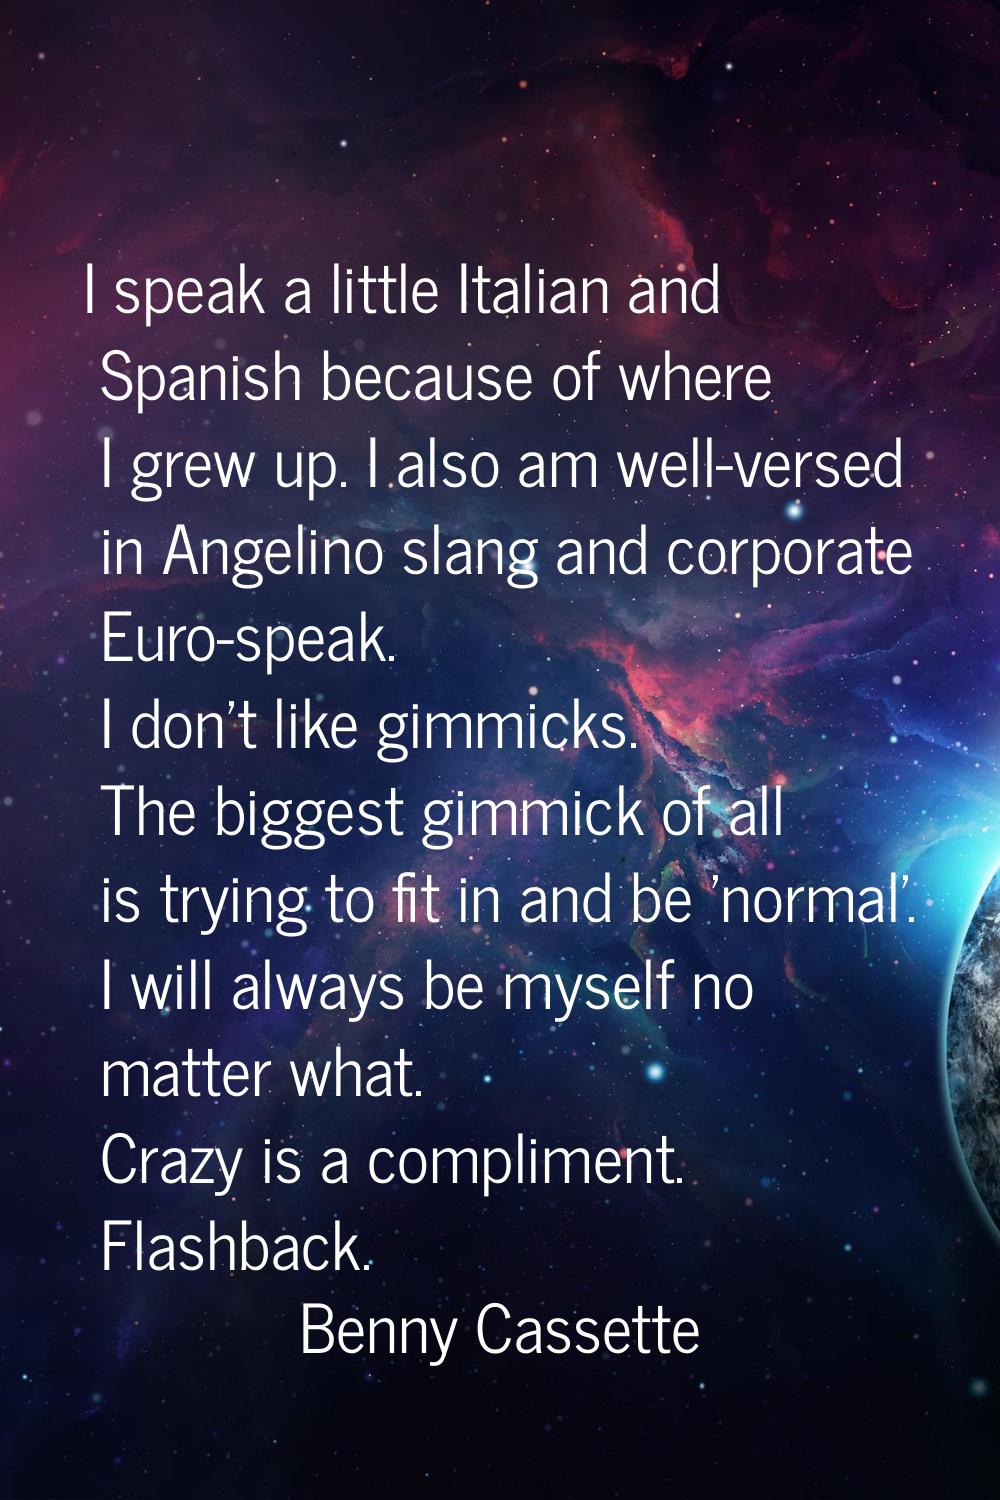 I speak a little Italian and Spanish because of where I grew up. I also am well-versed in Angelino 